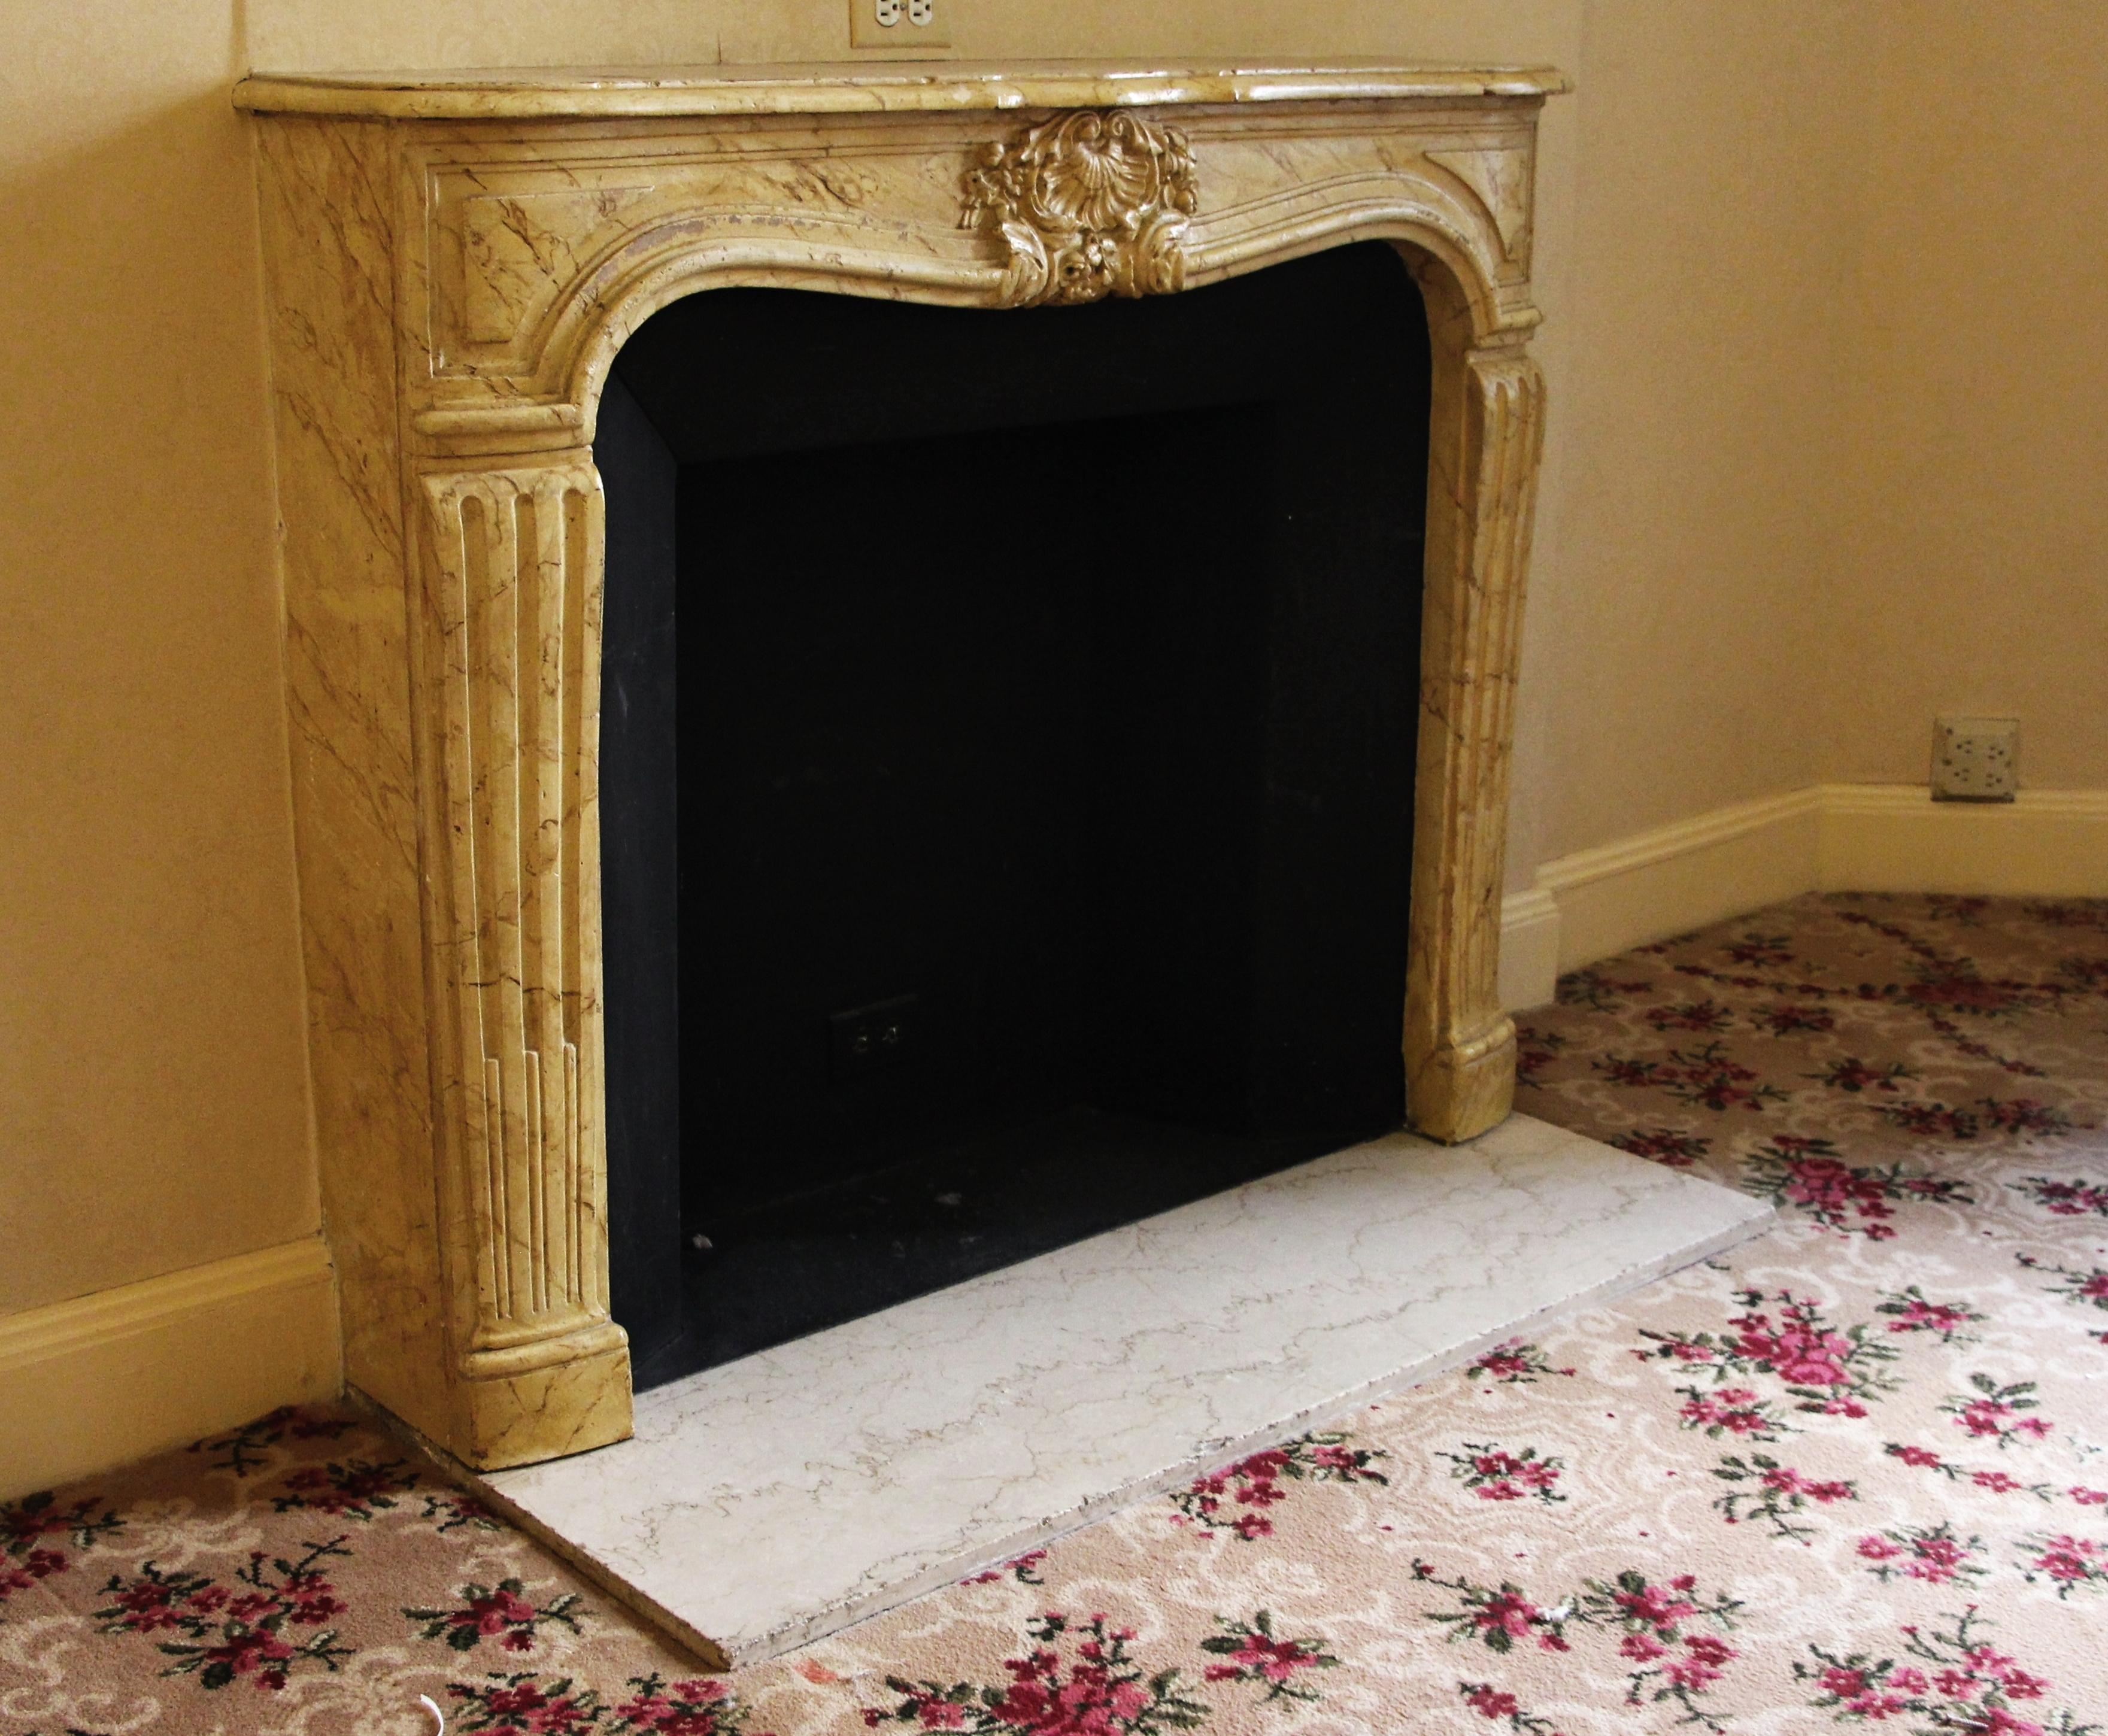 Louis XV carved limestone mantel with faux Sienna marble finish and Crema Marfil marble hearth. Made in France. This mantel was one of a group of antique mantels imported from Europe and installed in the Waldorf Astoria hotel in the 1930's when the